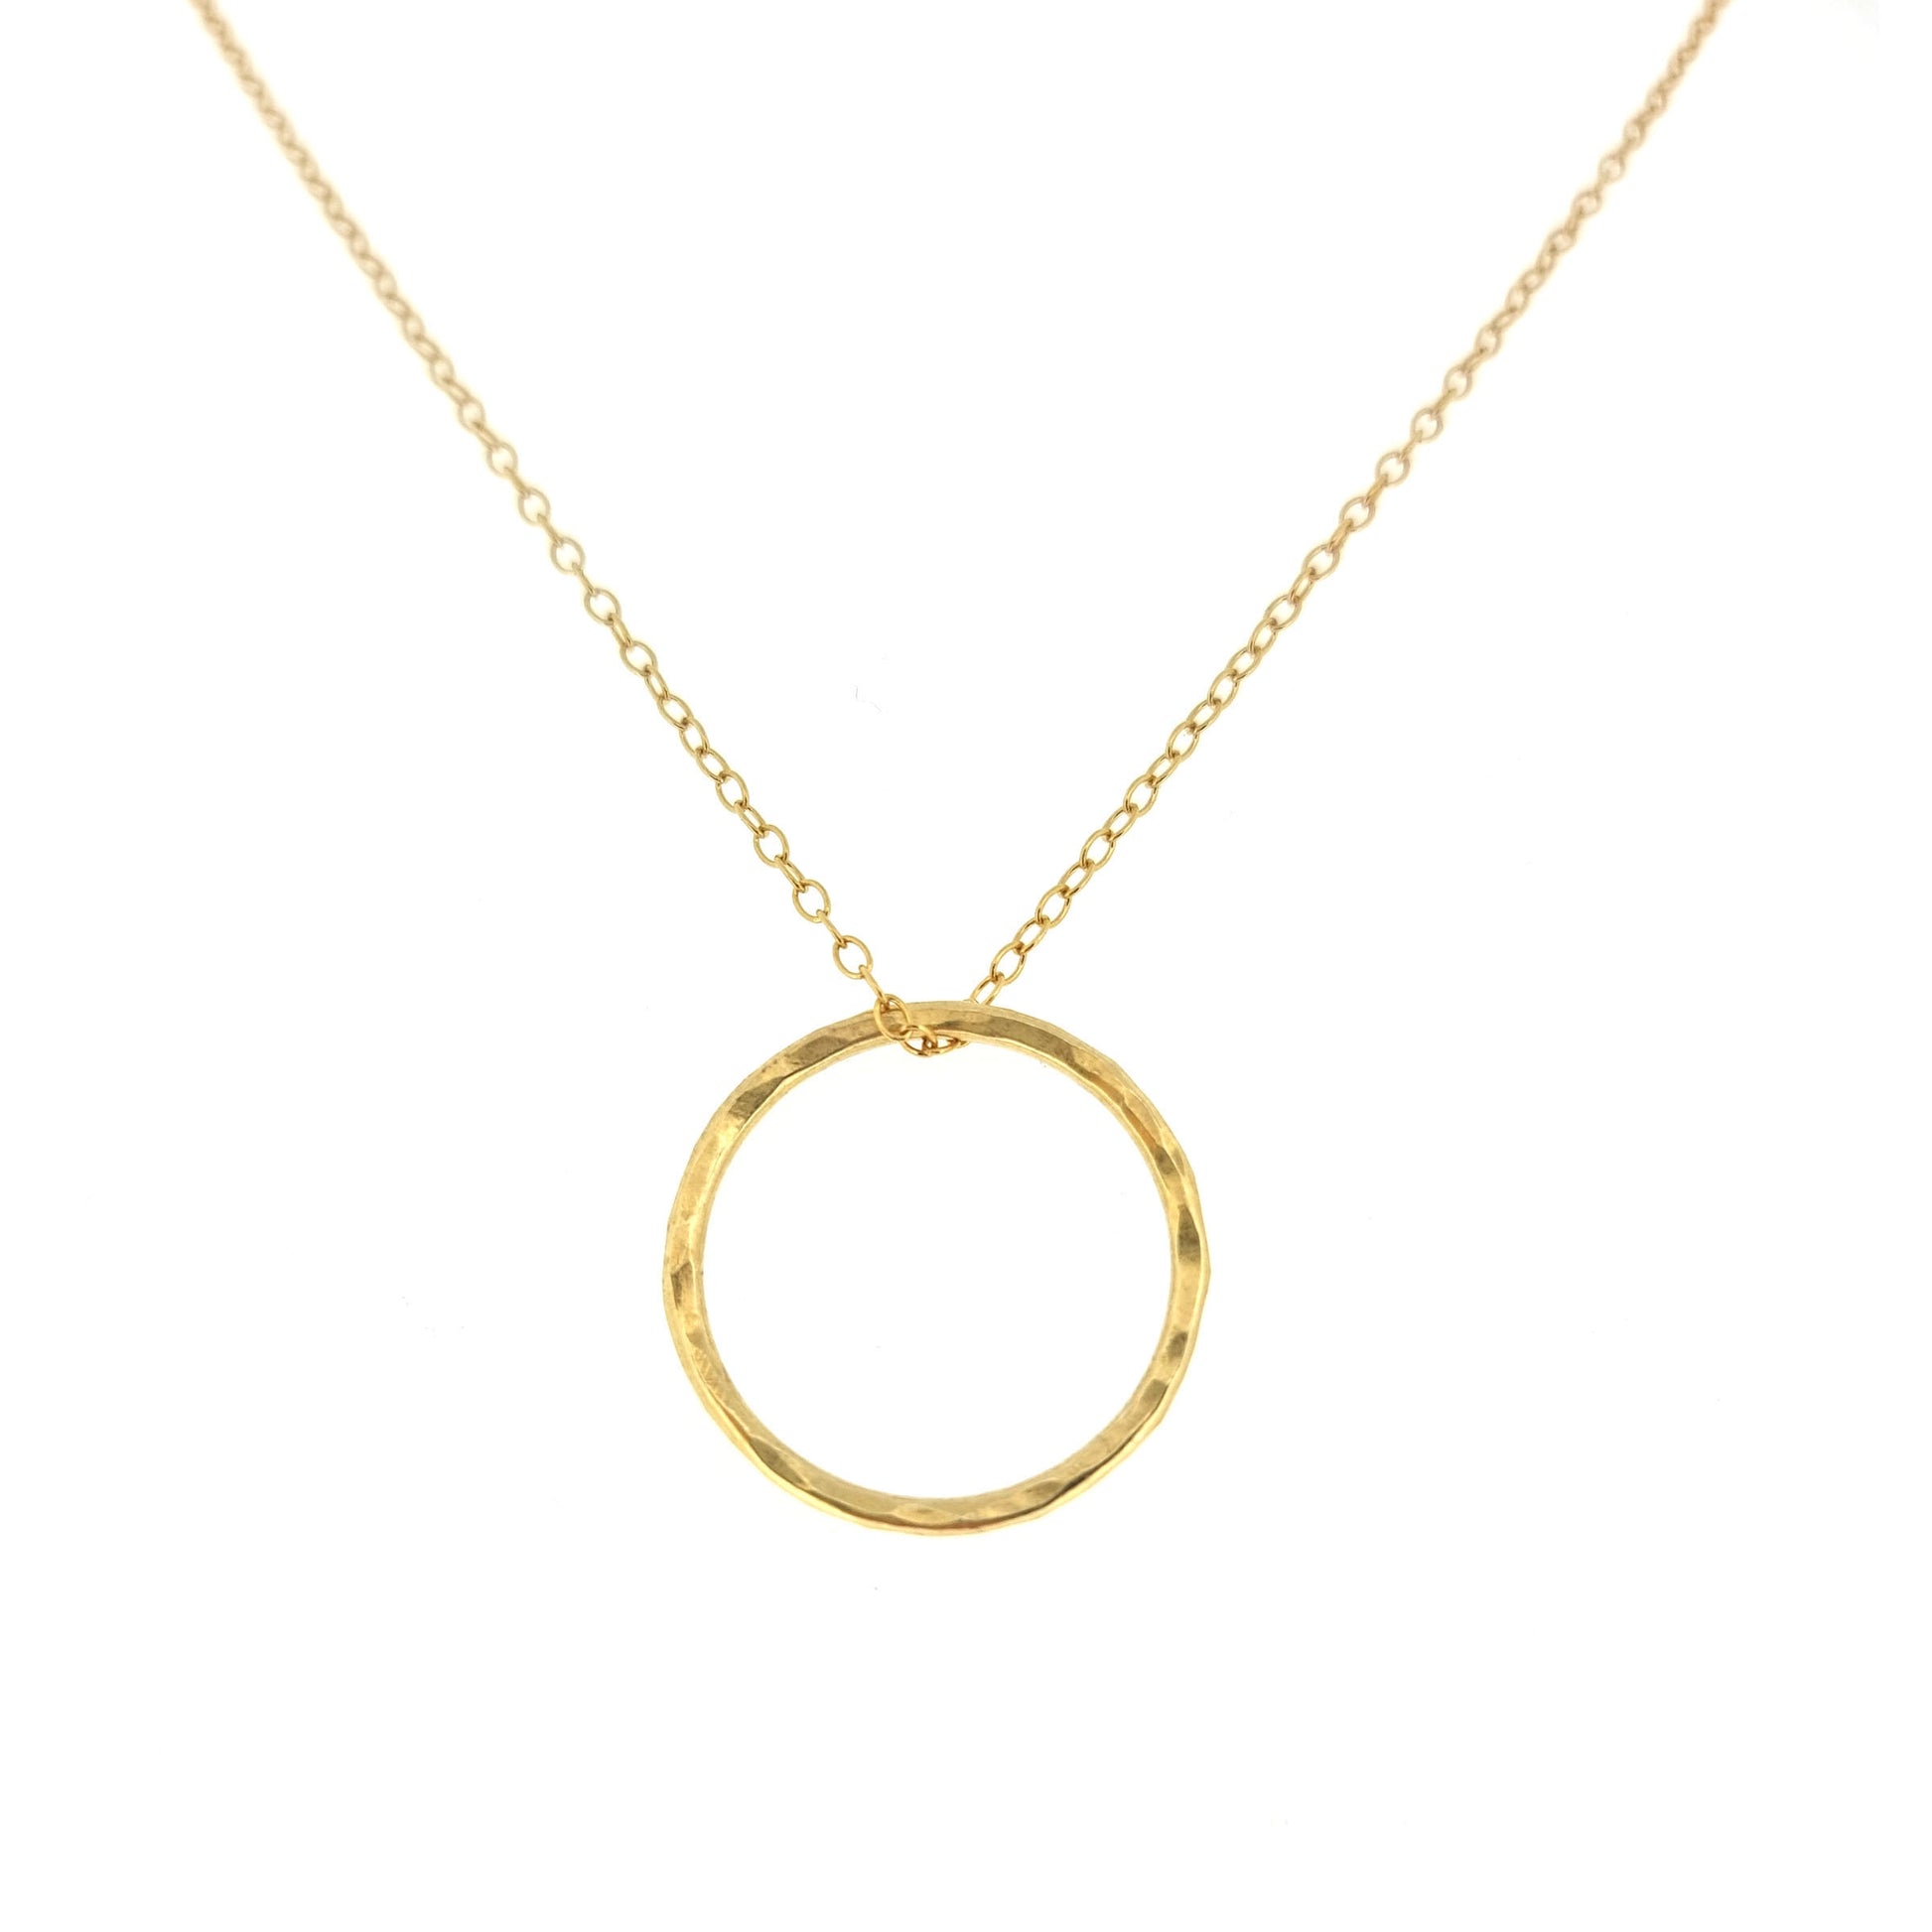 Yellow gold vermeil open circle pendant with hammered texture on a yellow gold vermeil chain. Large